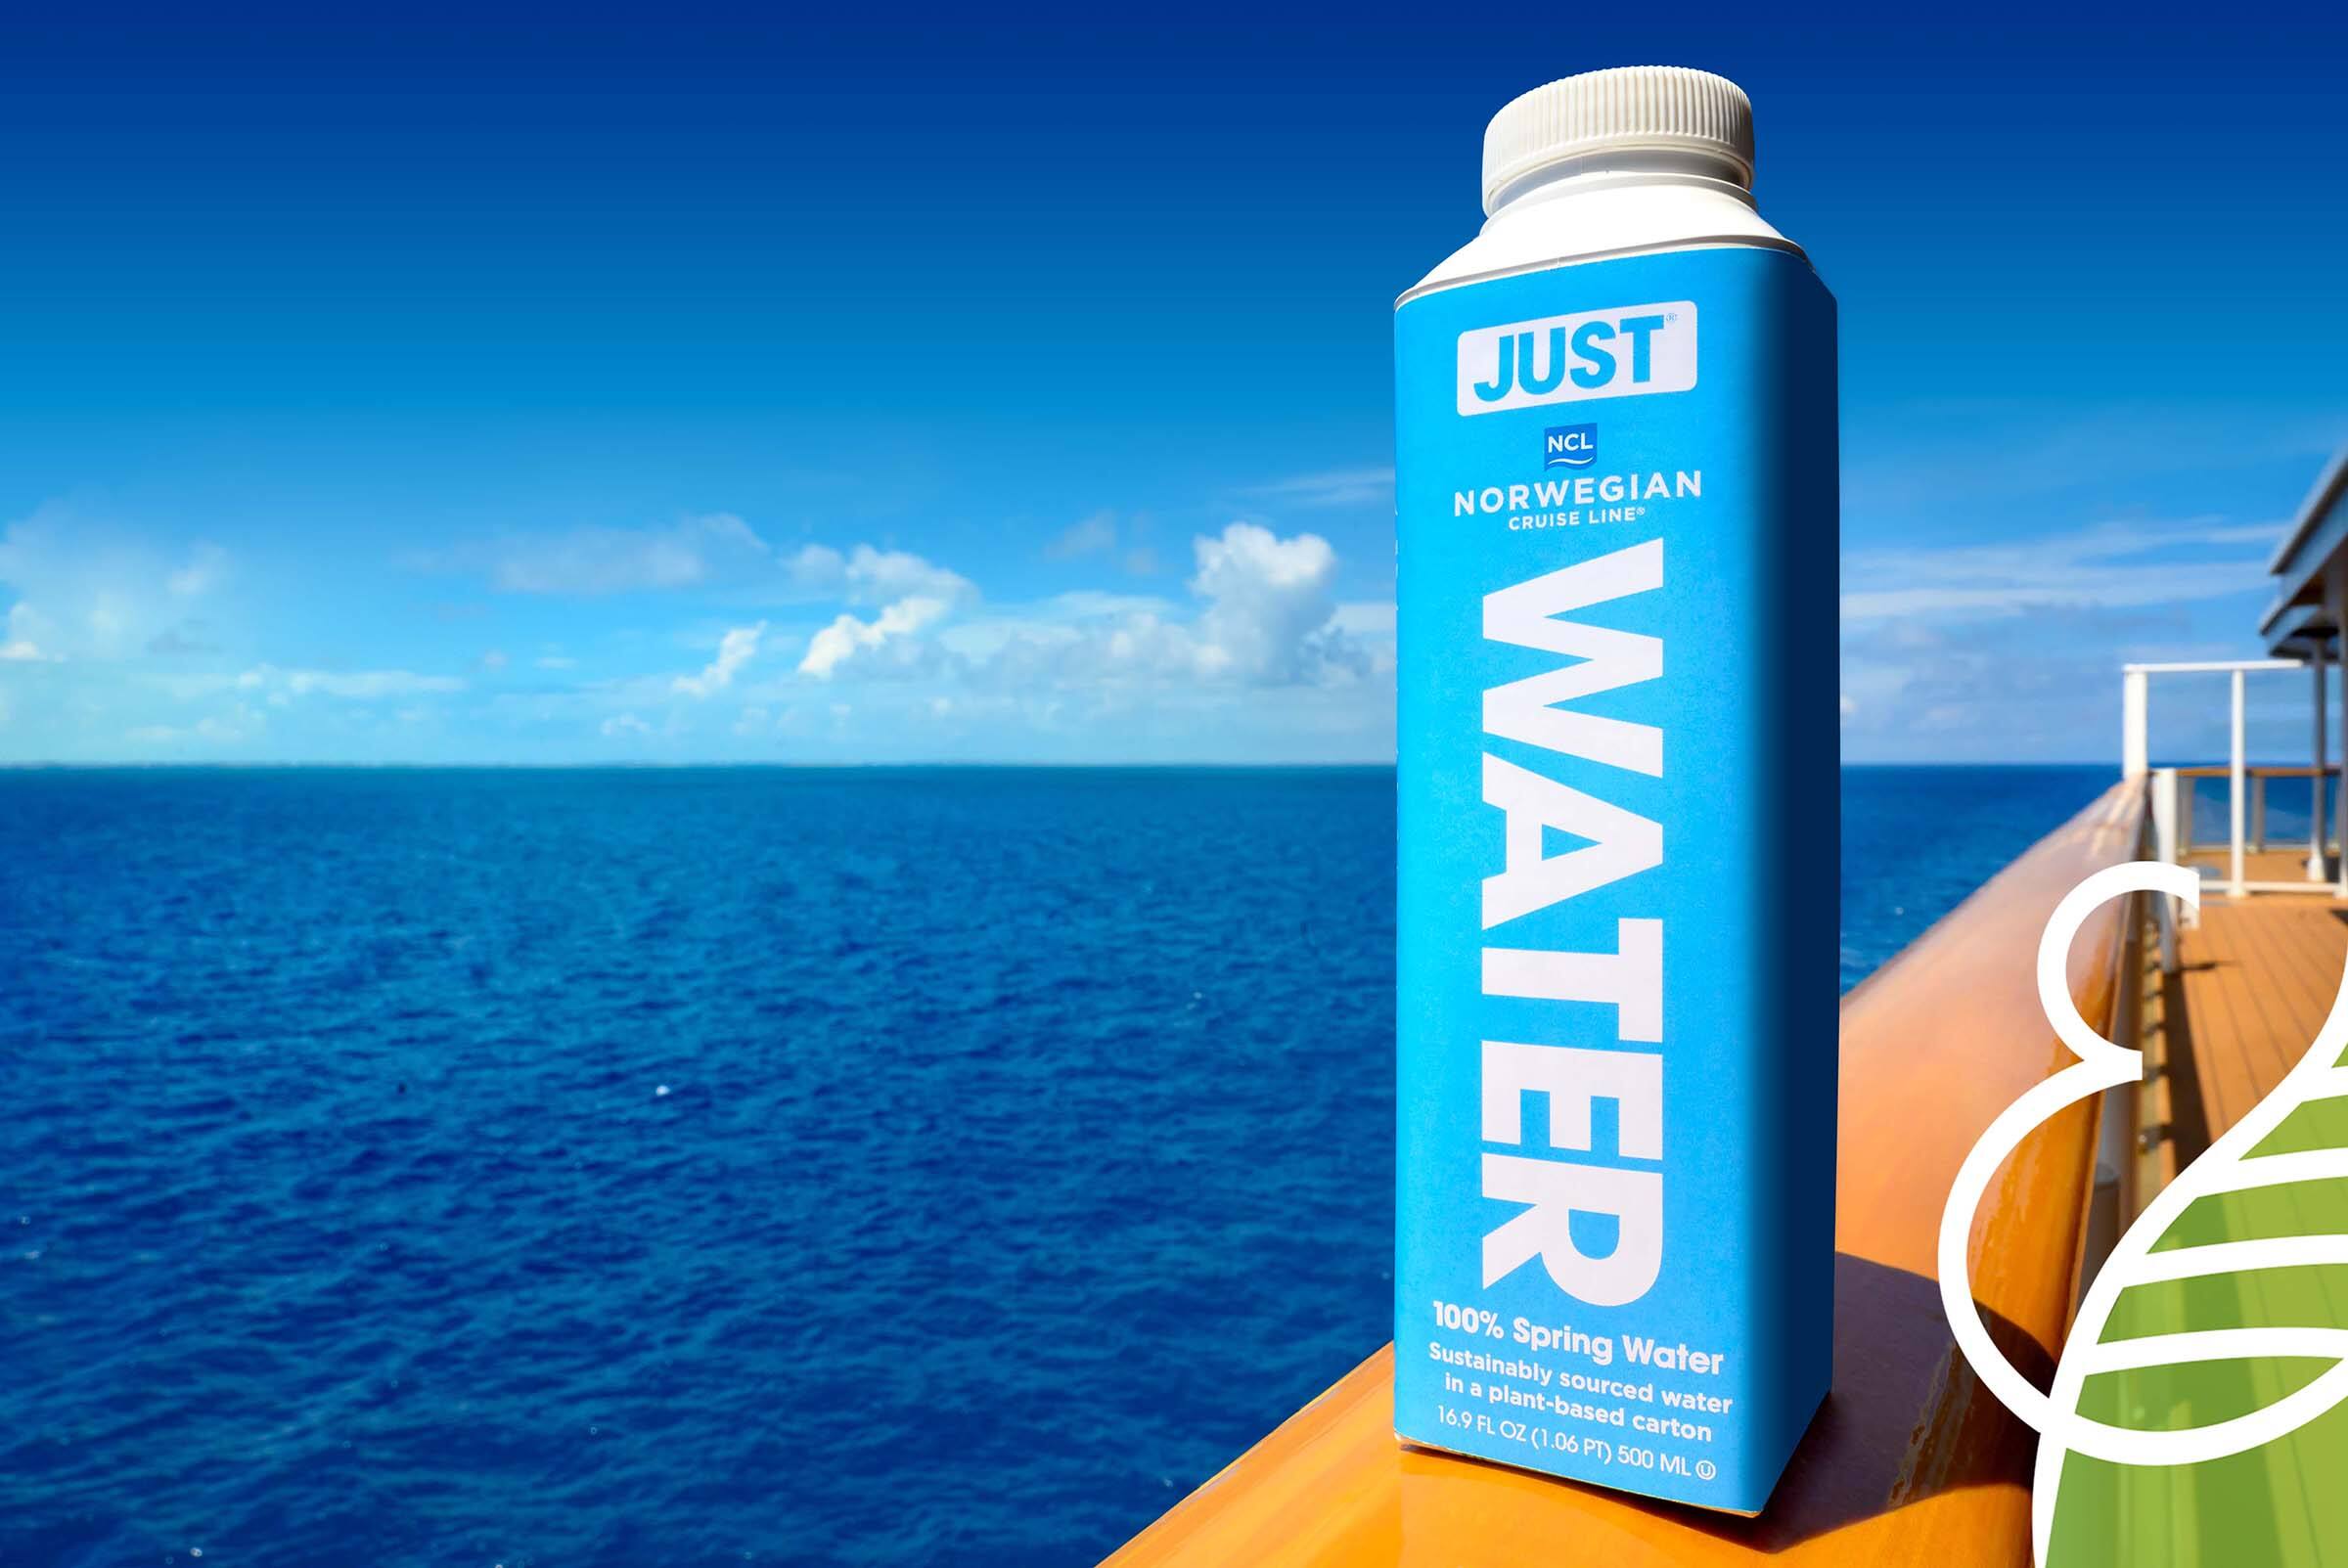 Norwegian Cruise Line has replaced all single-use plastic beverage bottles acros